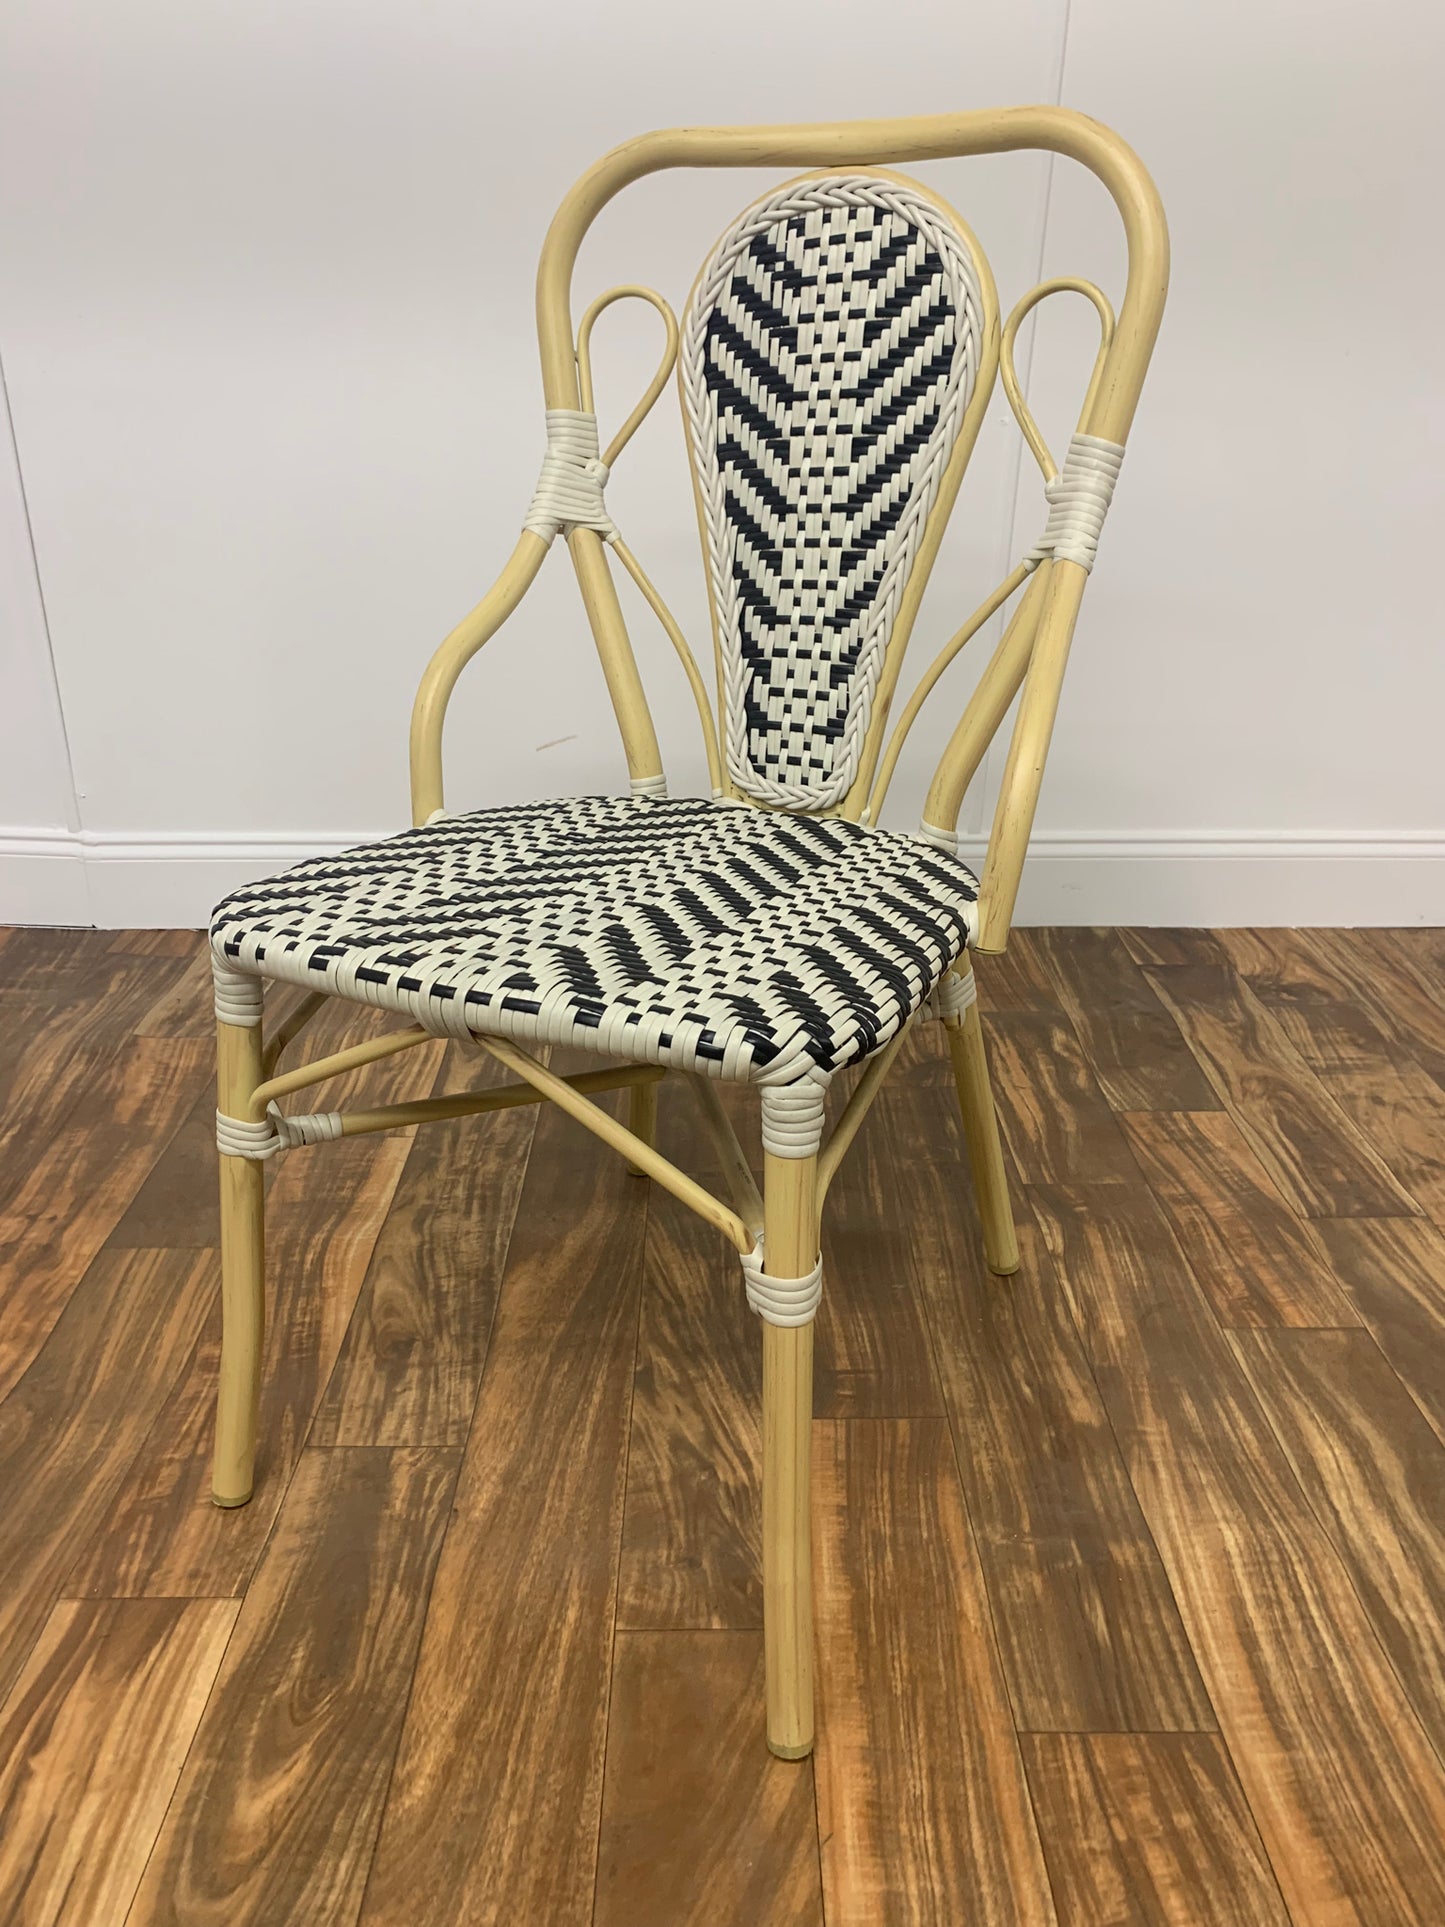 BLACK AND WHITE WICKER RATTAN DINING CHAIR